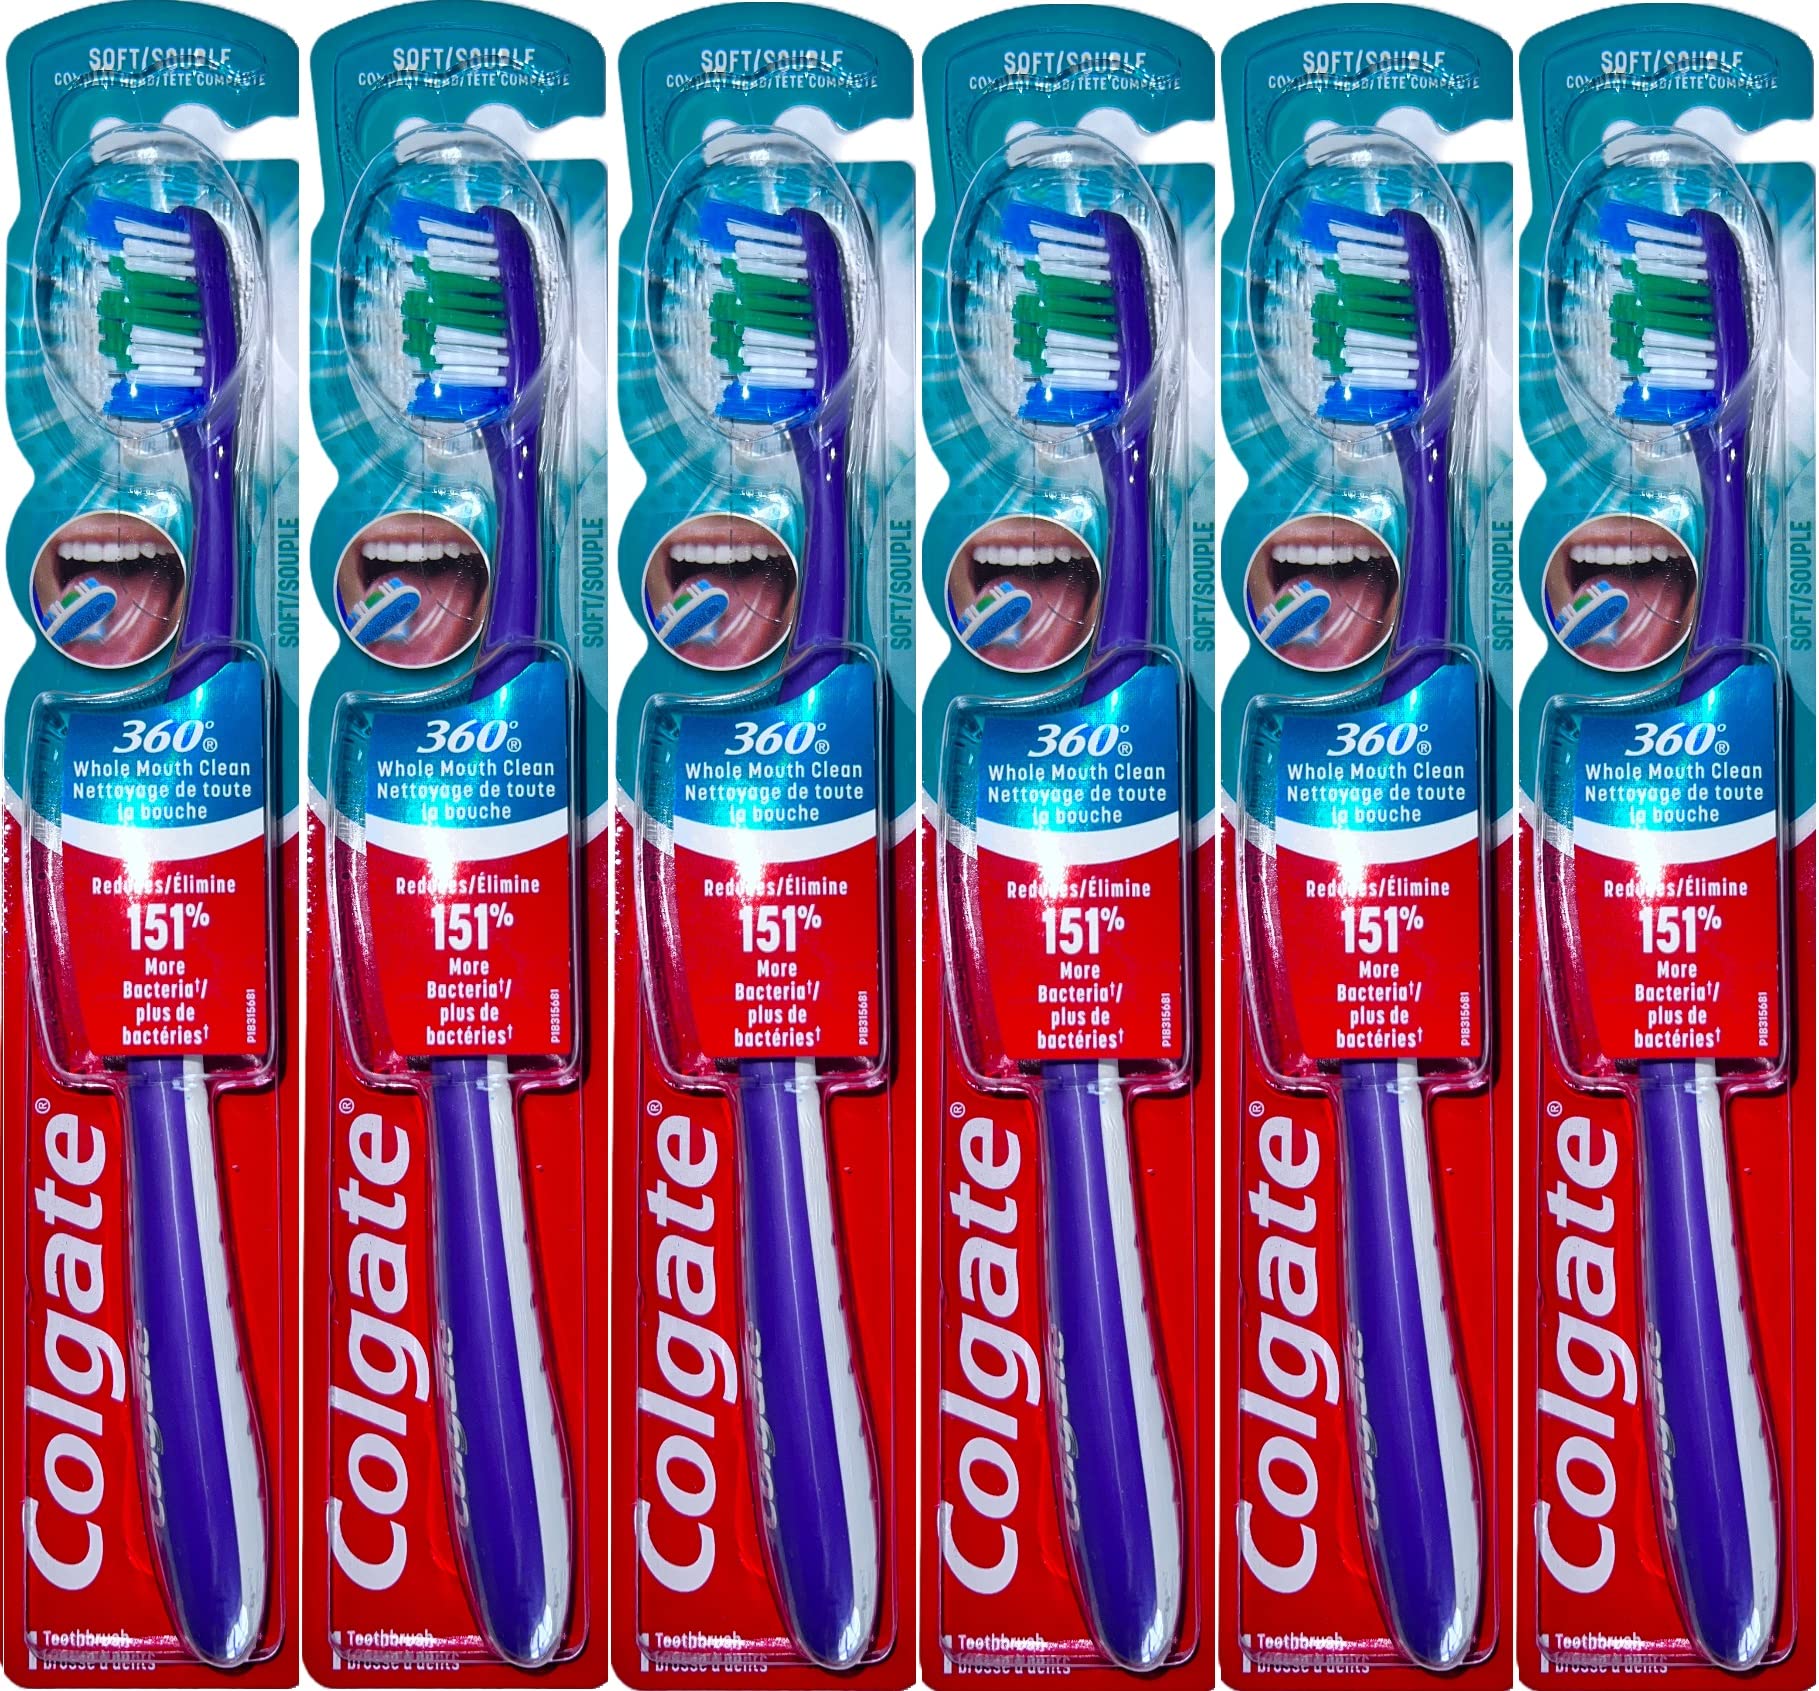 Colgate 360 Toothbrush with Tongue and Cheek Cleaner, Soft Toothbrush, 1  Pack